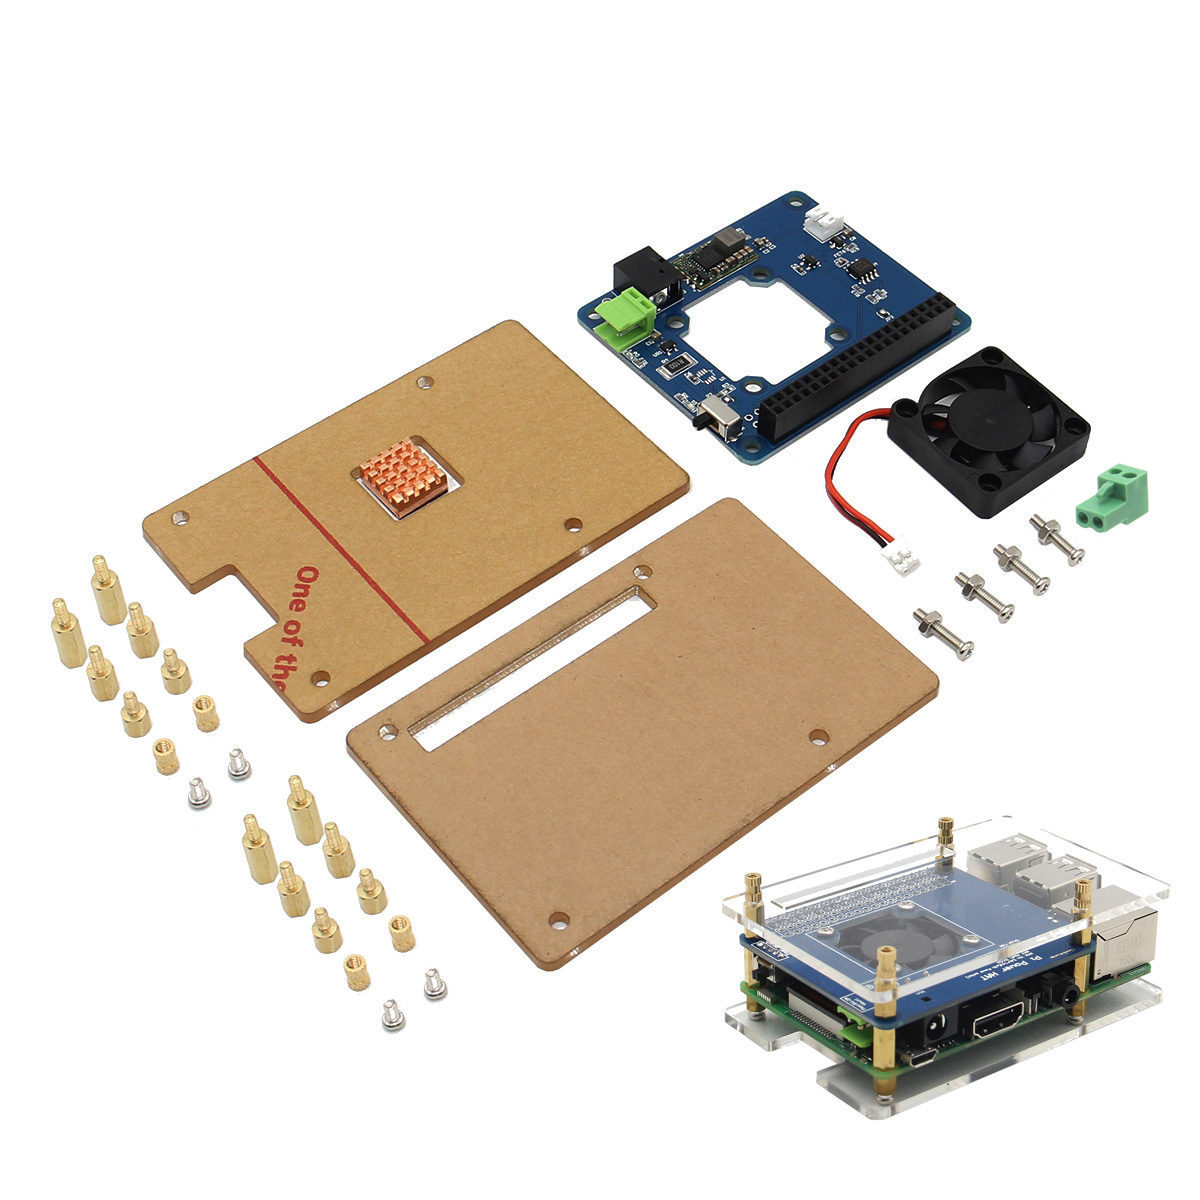 

Geekworm Programmable Smart Temperature Control Fan And Power Expansion Board + Acrylic Case + Copper Heat Sink Kit For Raspberry Pi 3 / 2B / B+